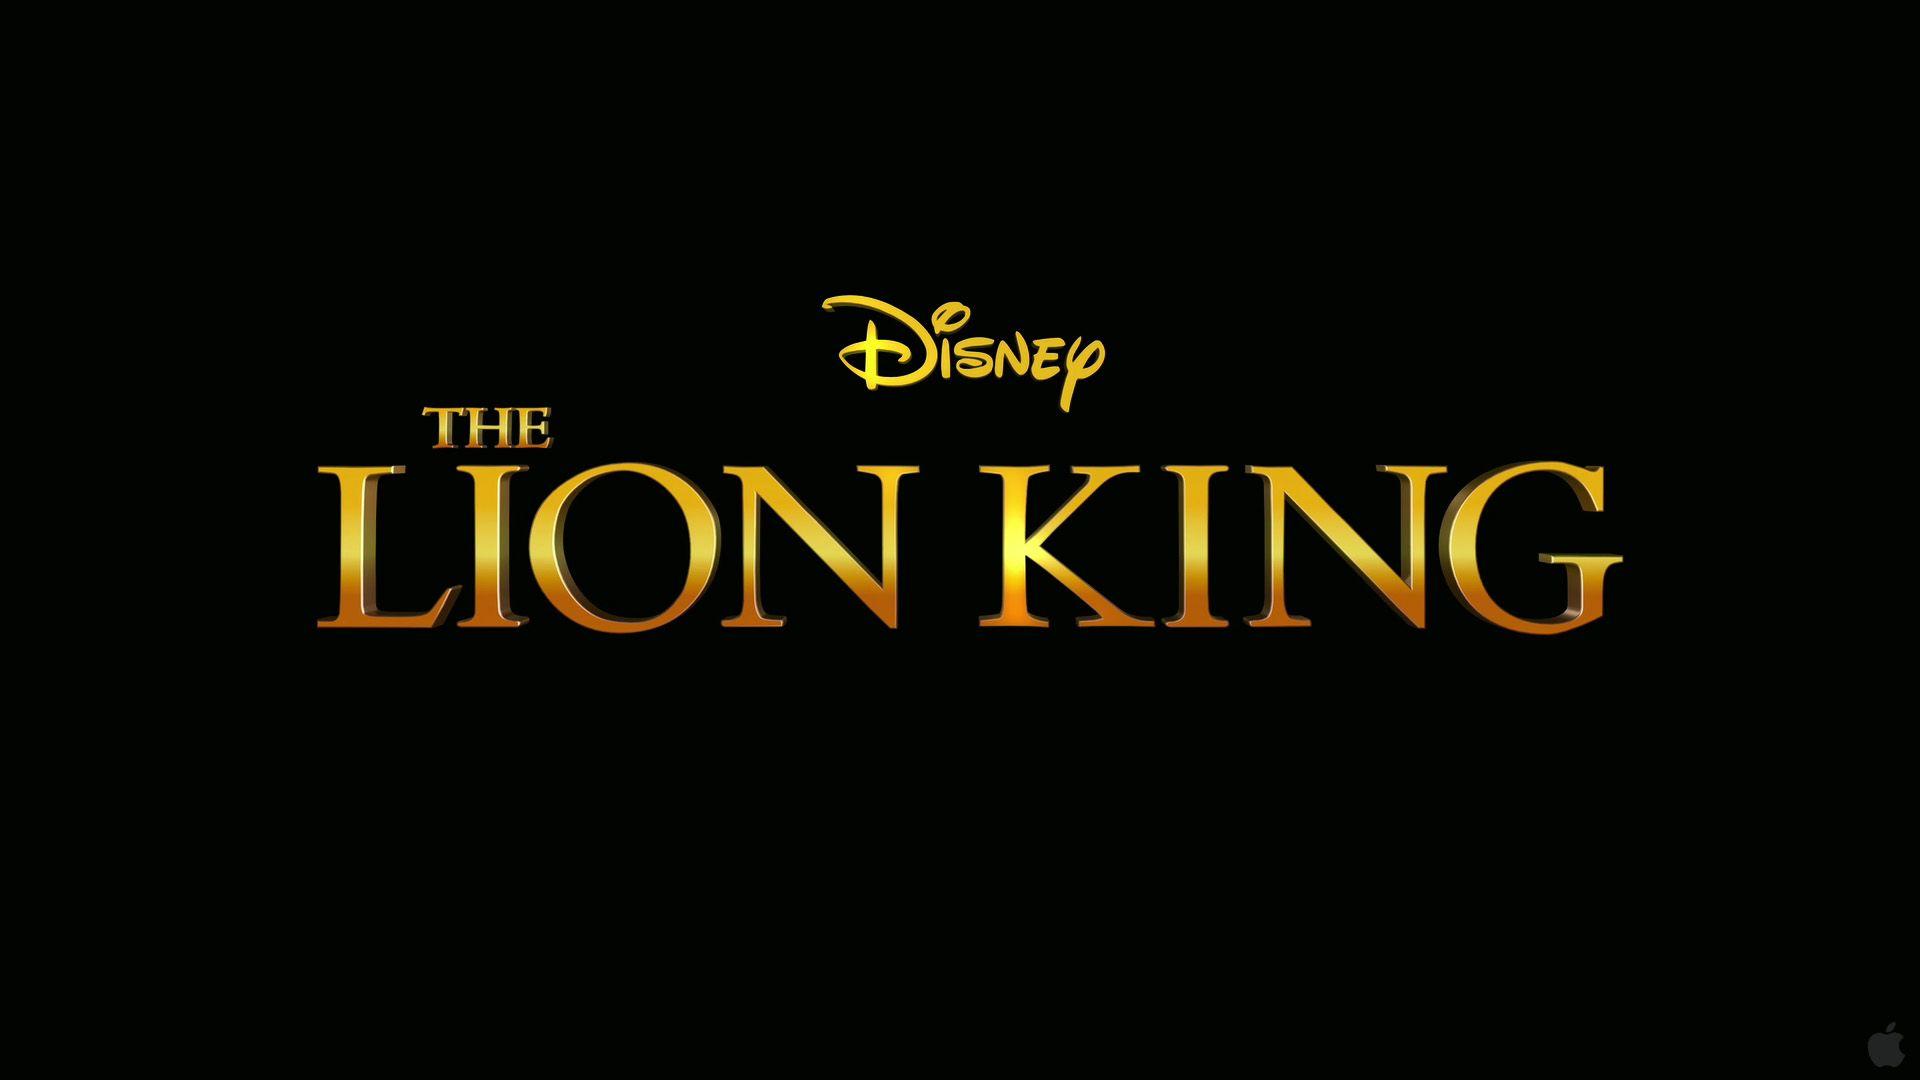 The Lion King 3D. Free Desktop Wallpaper for Widescreen, HD and Mobile